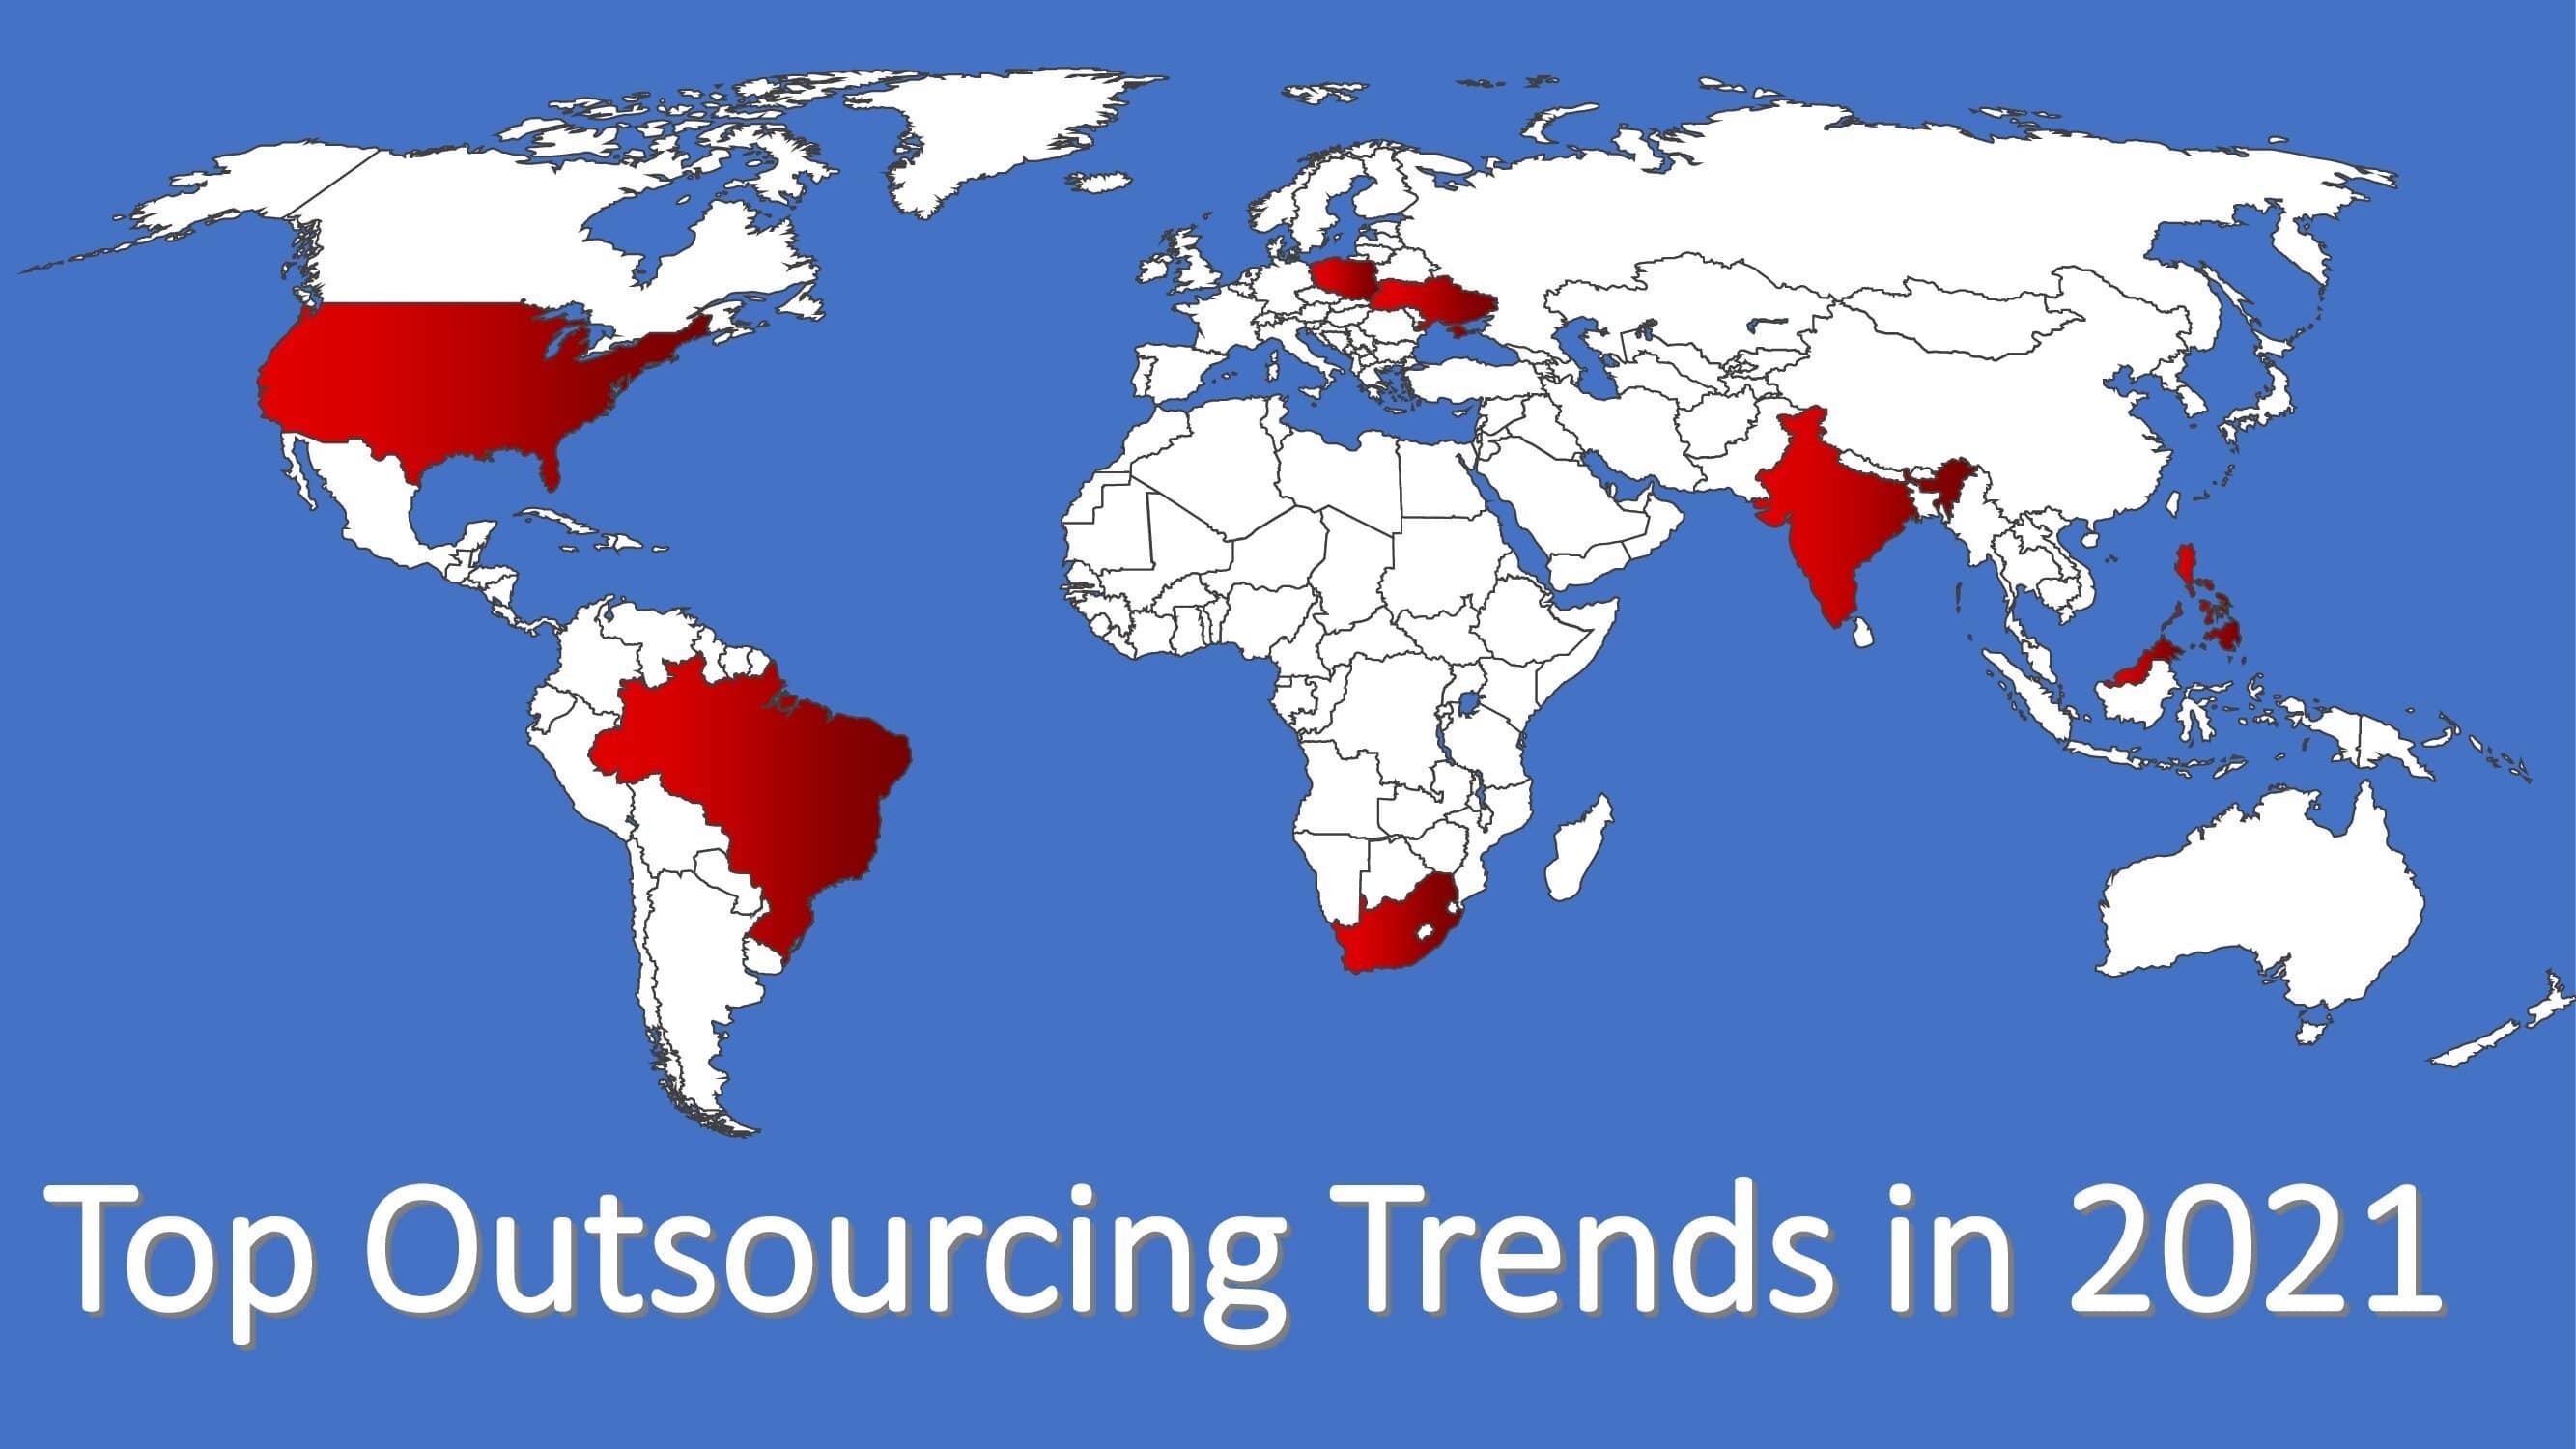 Look out for Top Outsourcing trends in 2021!